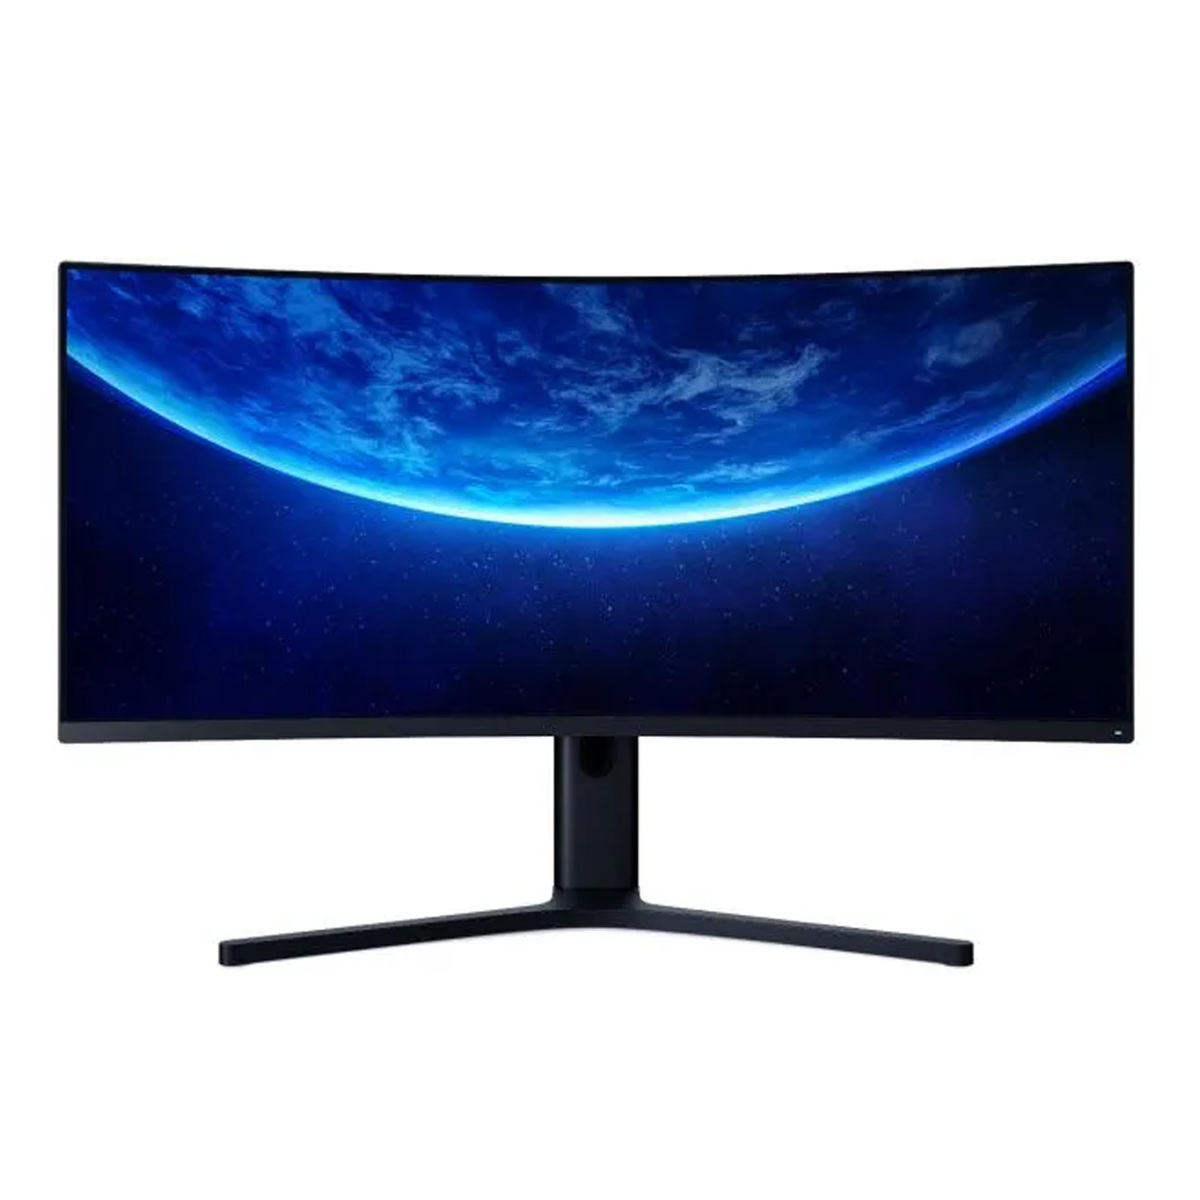 Mi Curved Gaming Monitor BHR5117HK 30